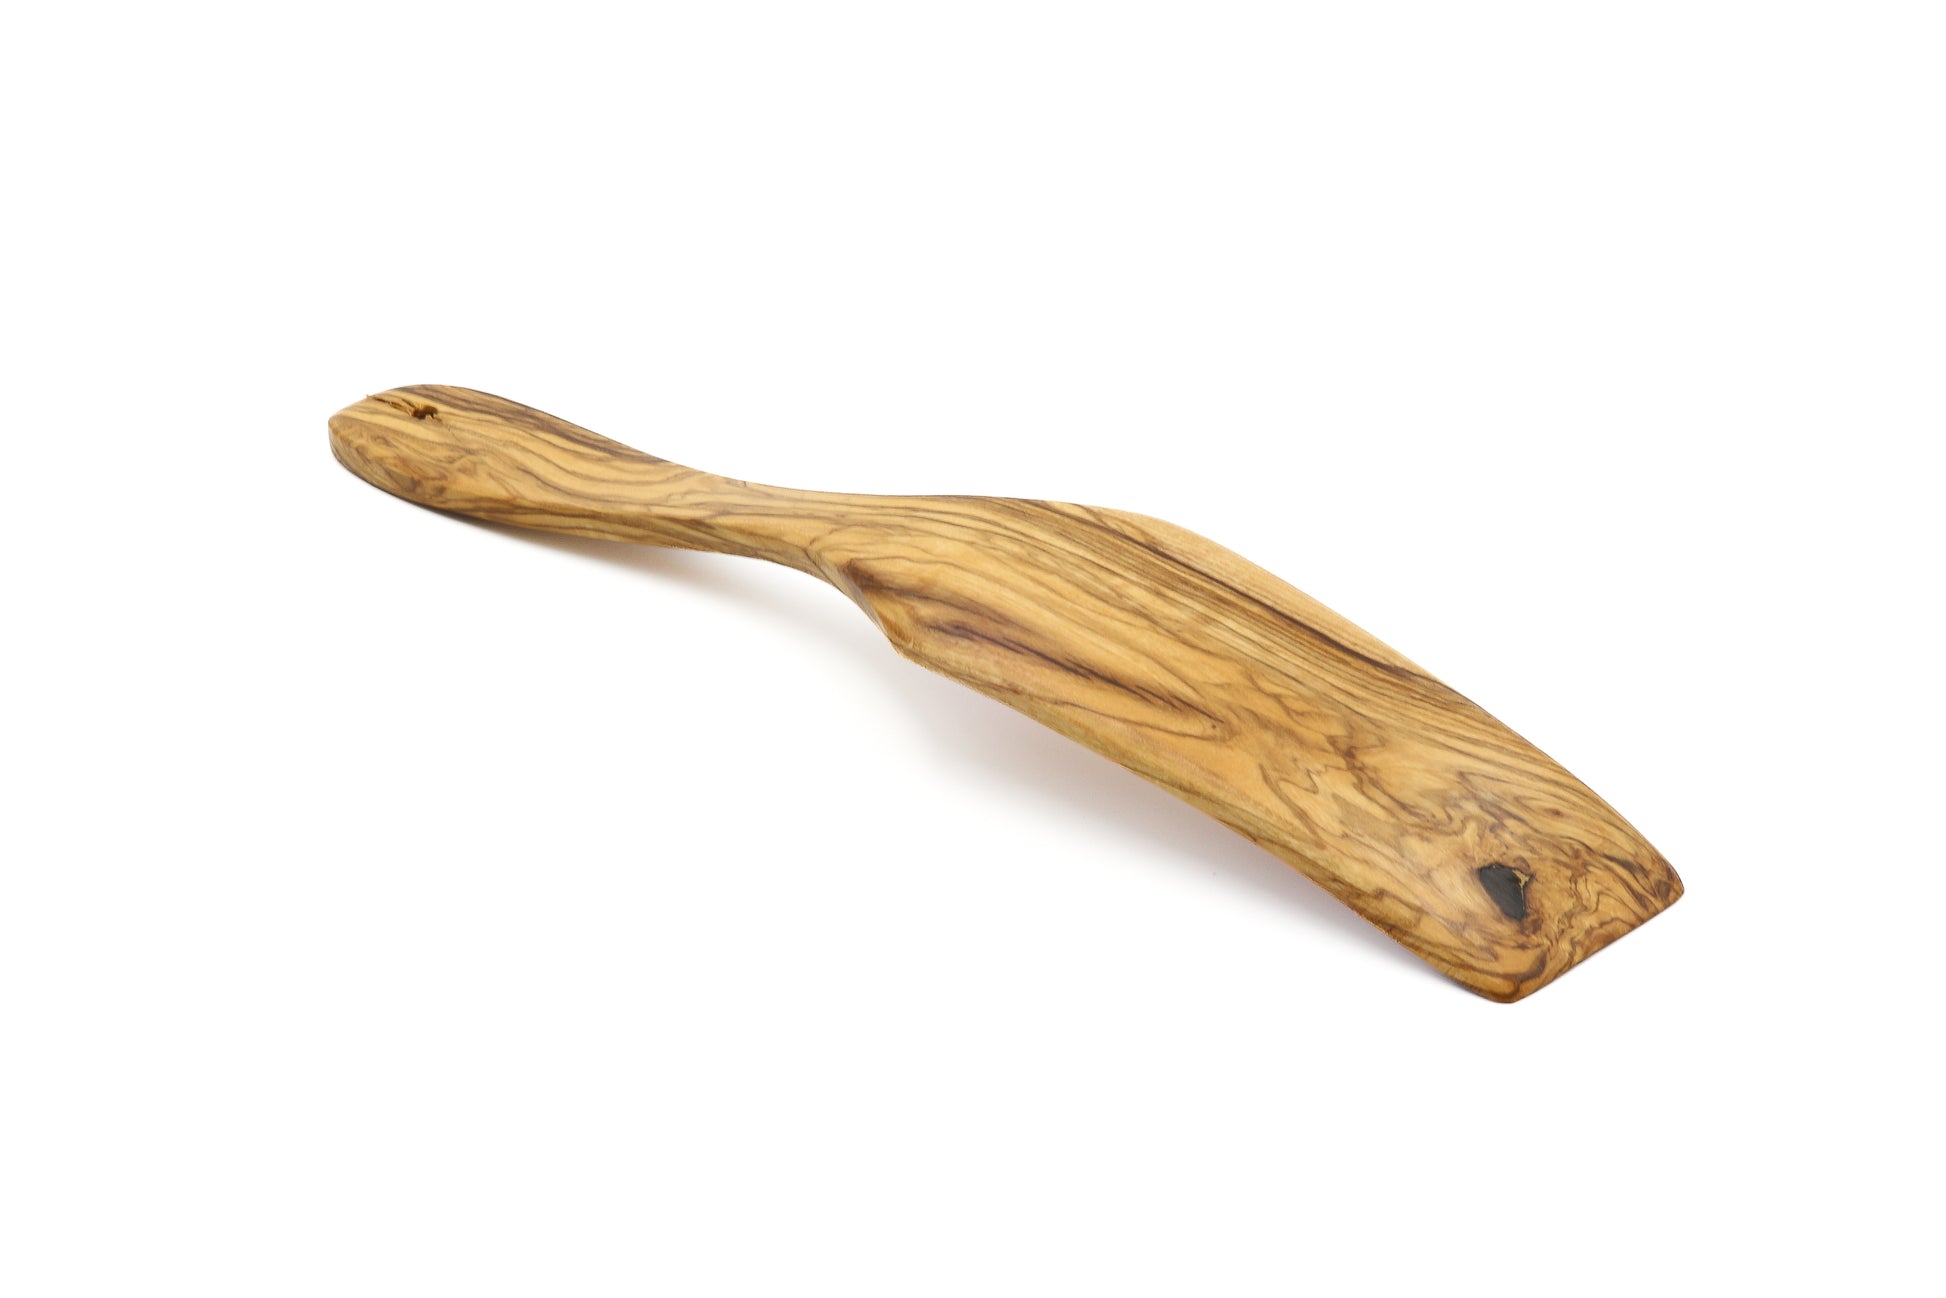 Artisan-crafted long curved spatula for your kitchen